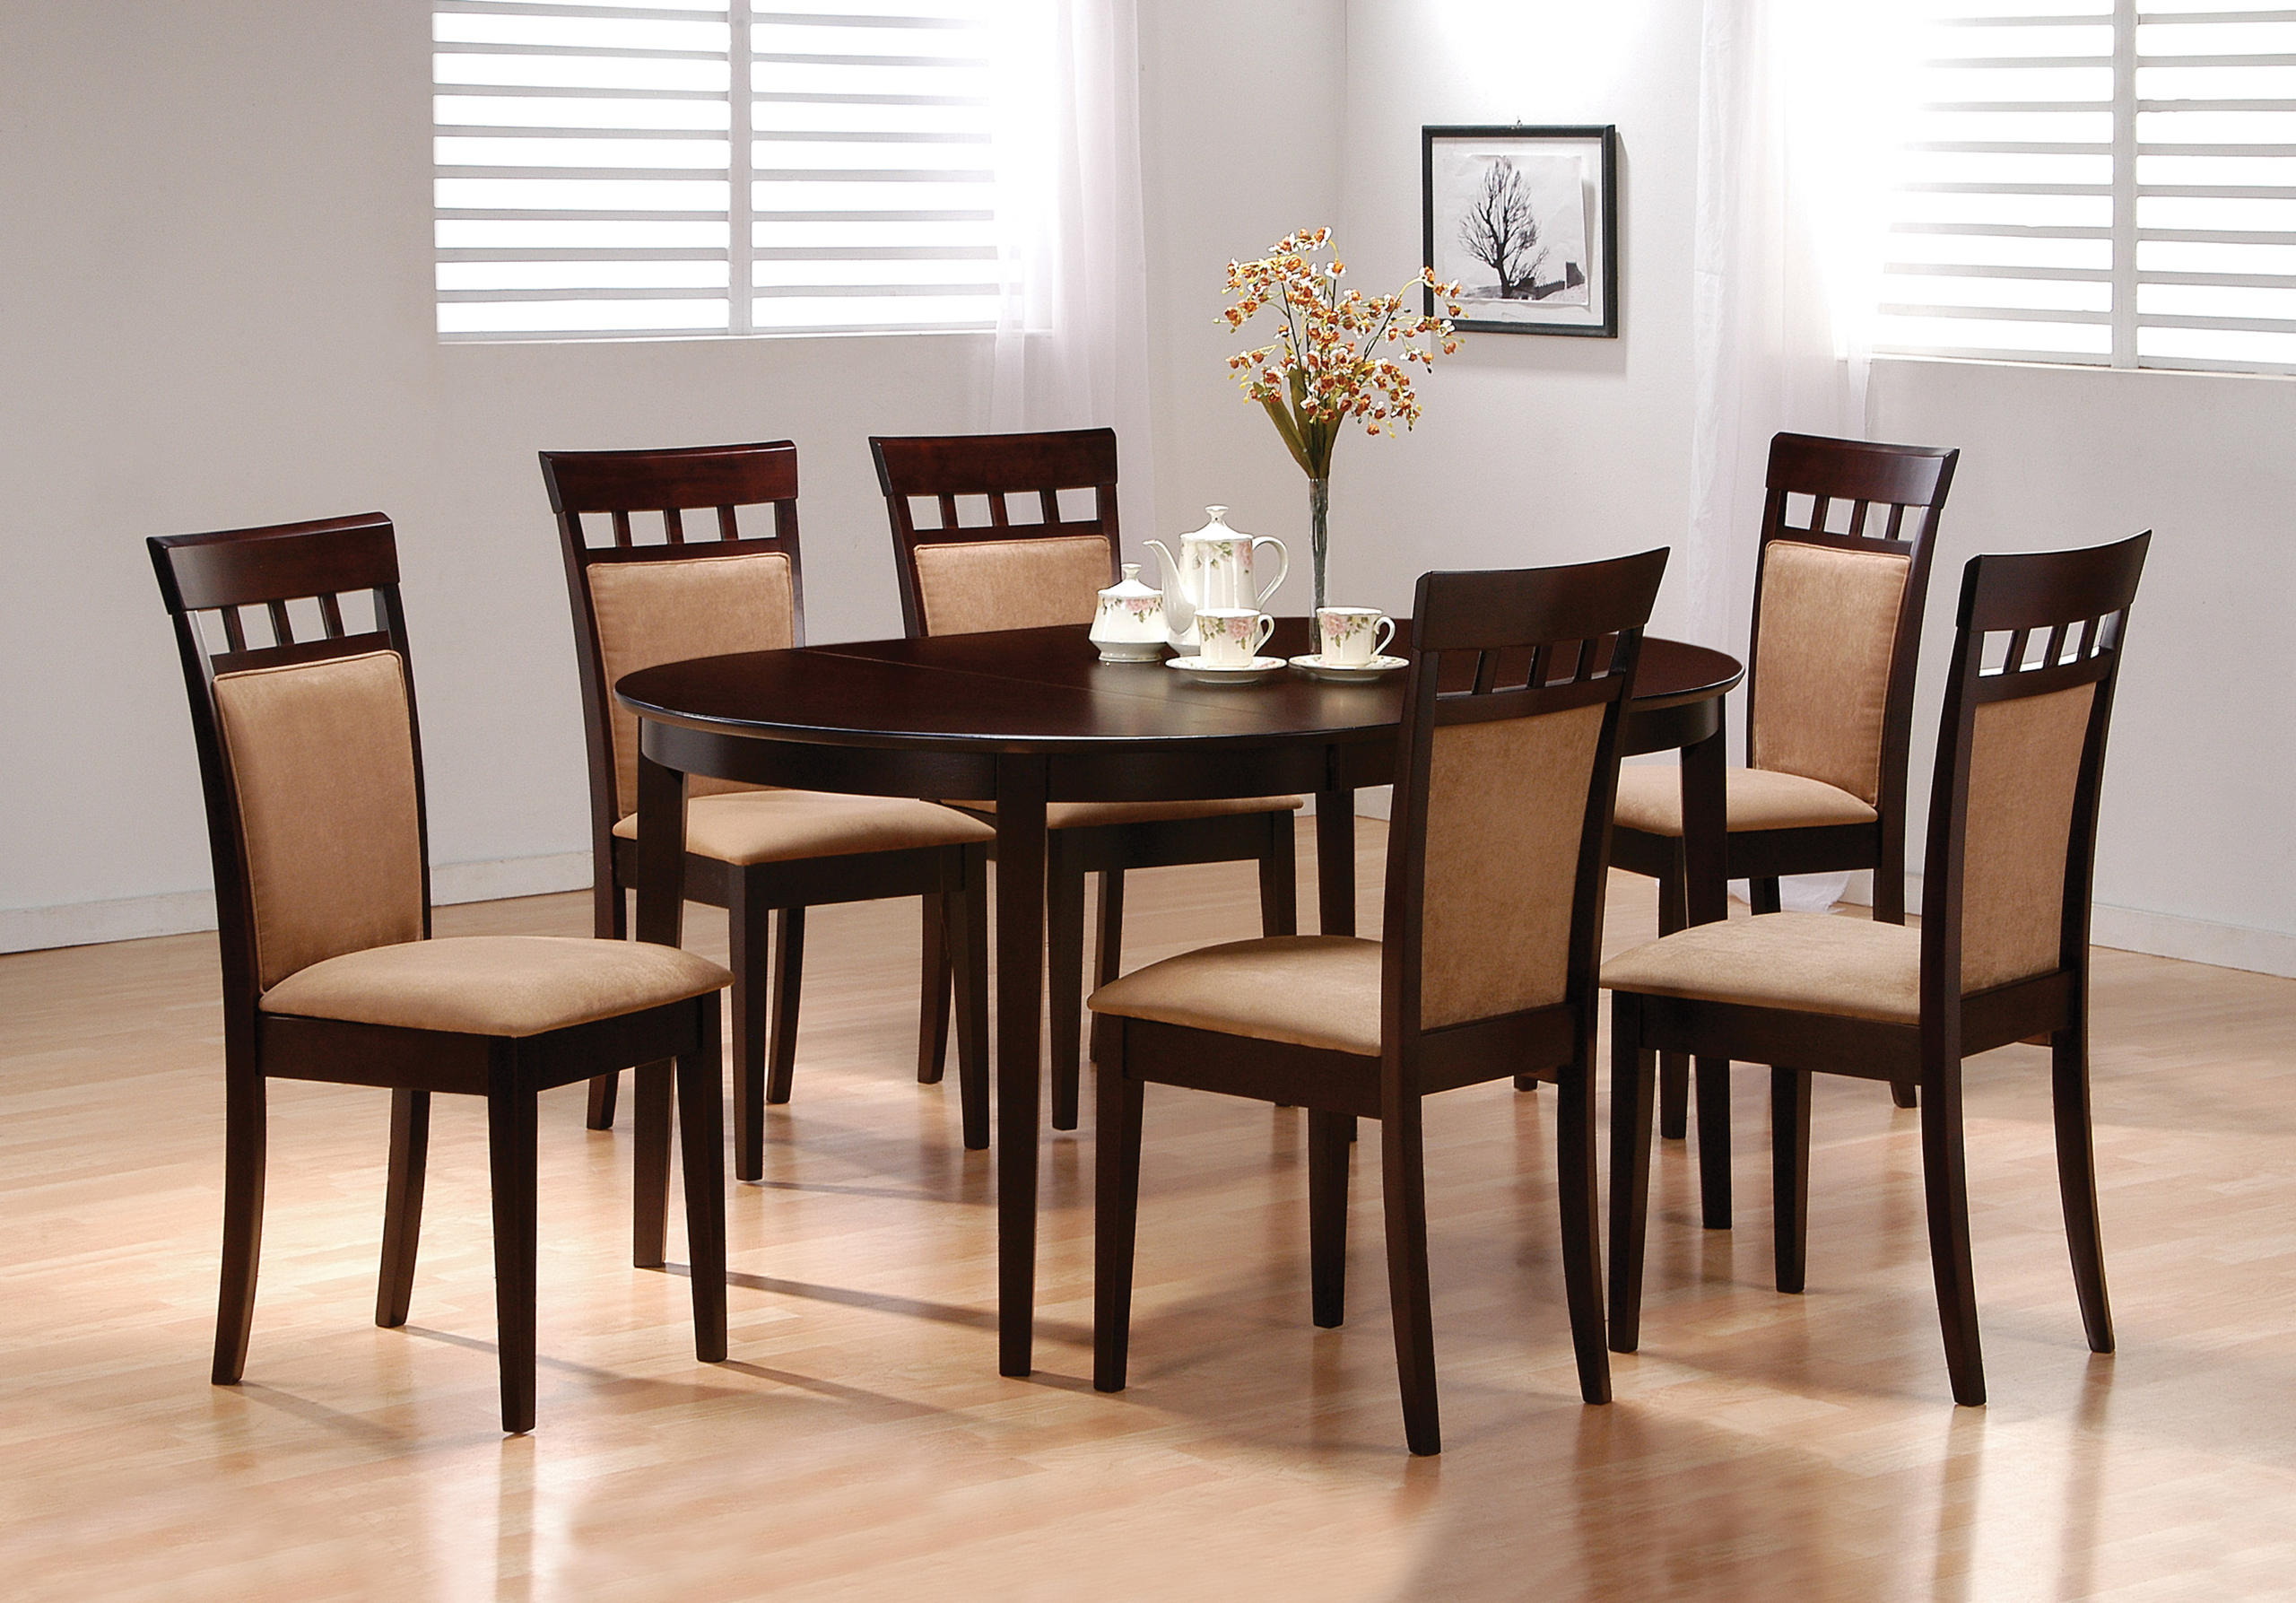 Round Dining Table For 6 Visualhunt, Round Dining Table For 6 Counter Height